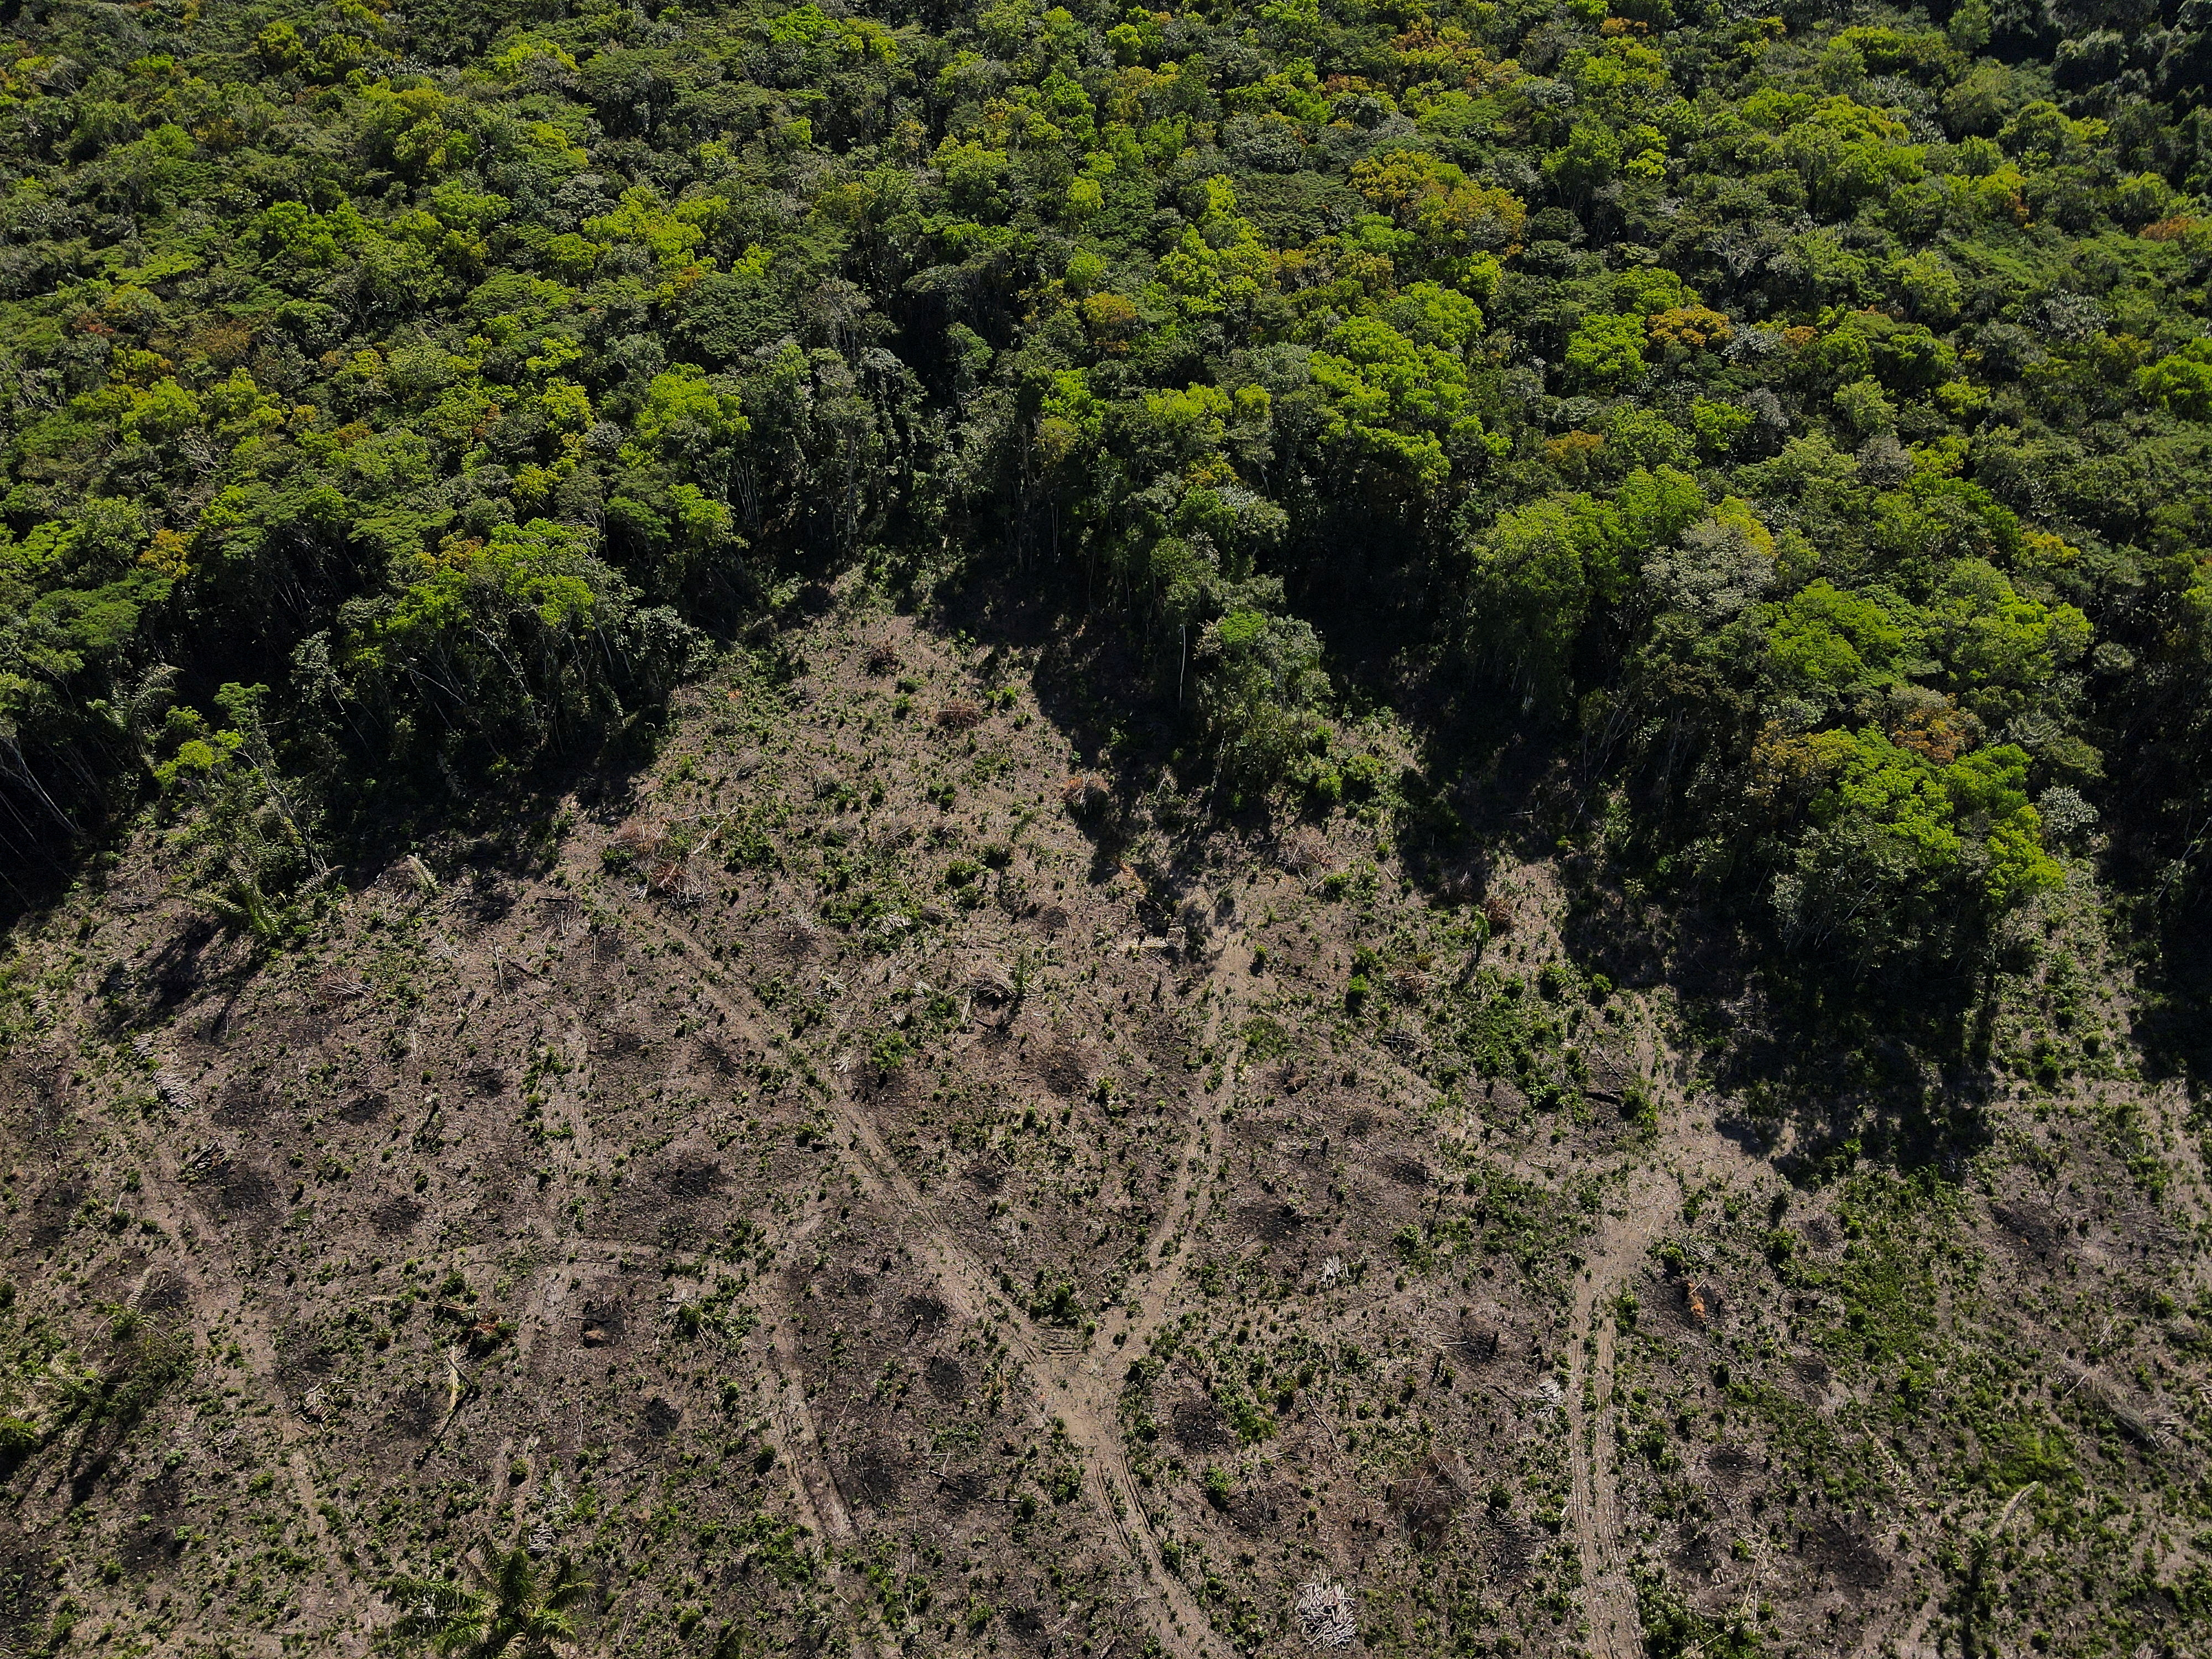 An aerial view shows a deforested plot of the Amazon rainforest in Manaus